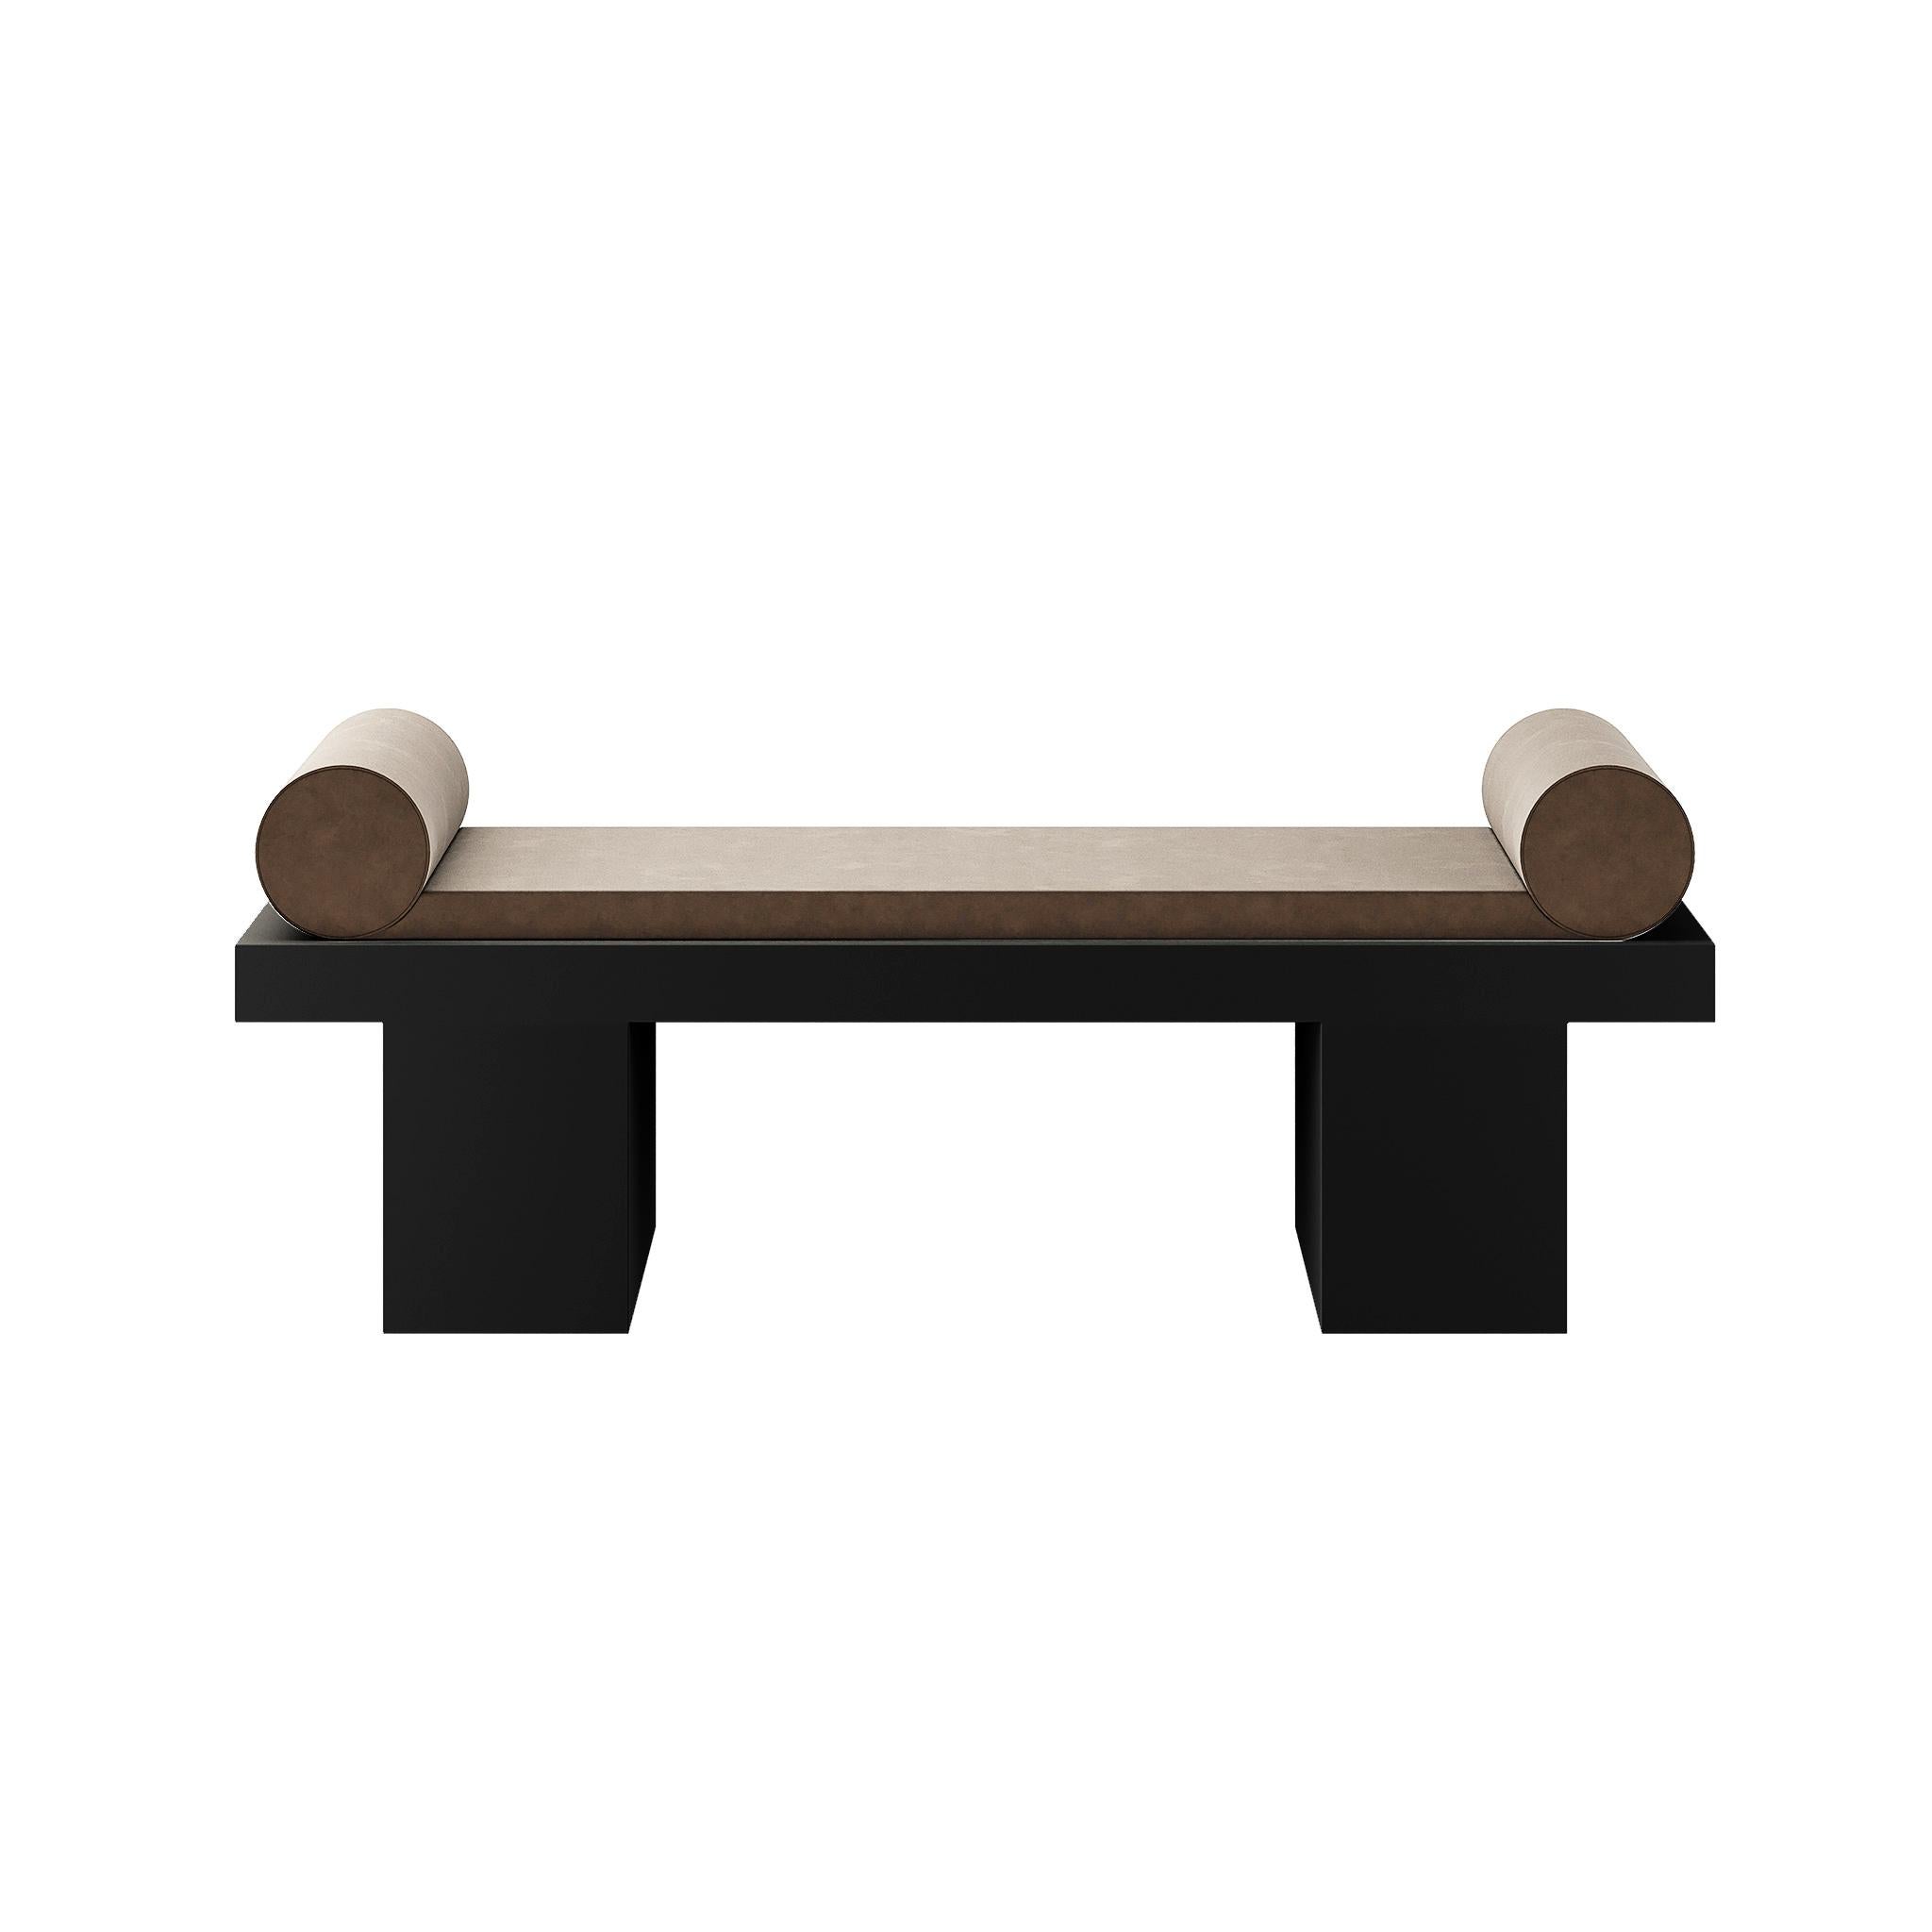 Modern Brutalist Style Bench Black Matte Lacquer Upholstery in Beige Suede

Our Contemporary Bench in Brutalist Style, a modern piece that seamlessly integrates into any contemporary environment. Inspired by brutalism, this bench stands out for its